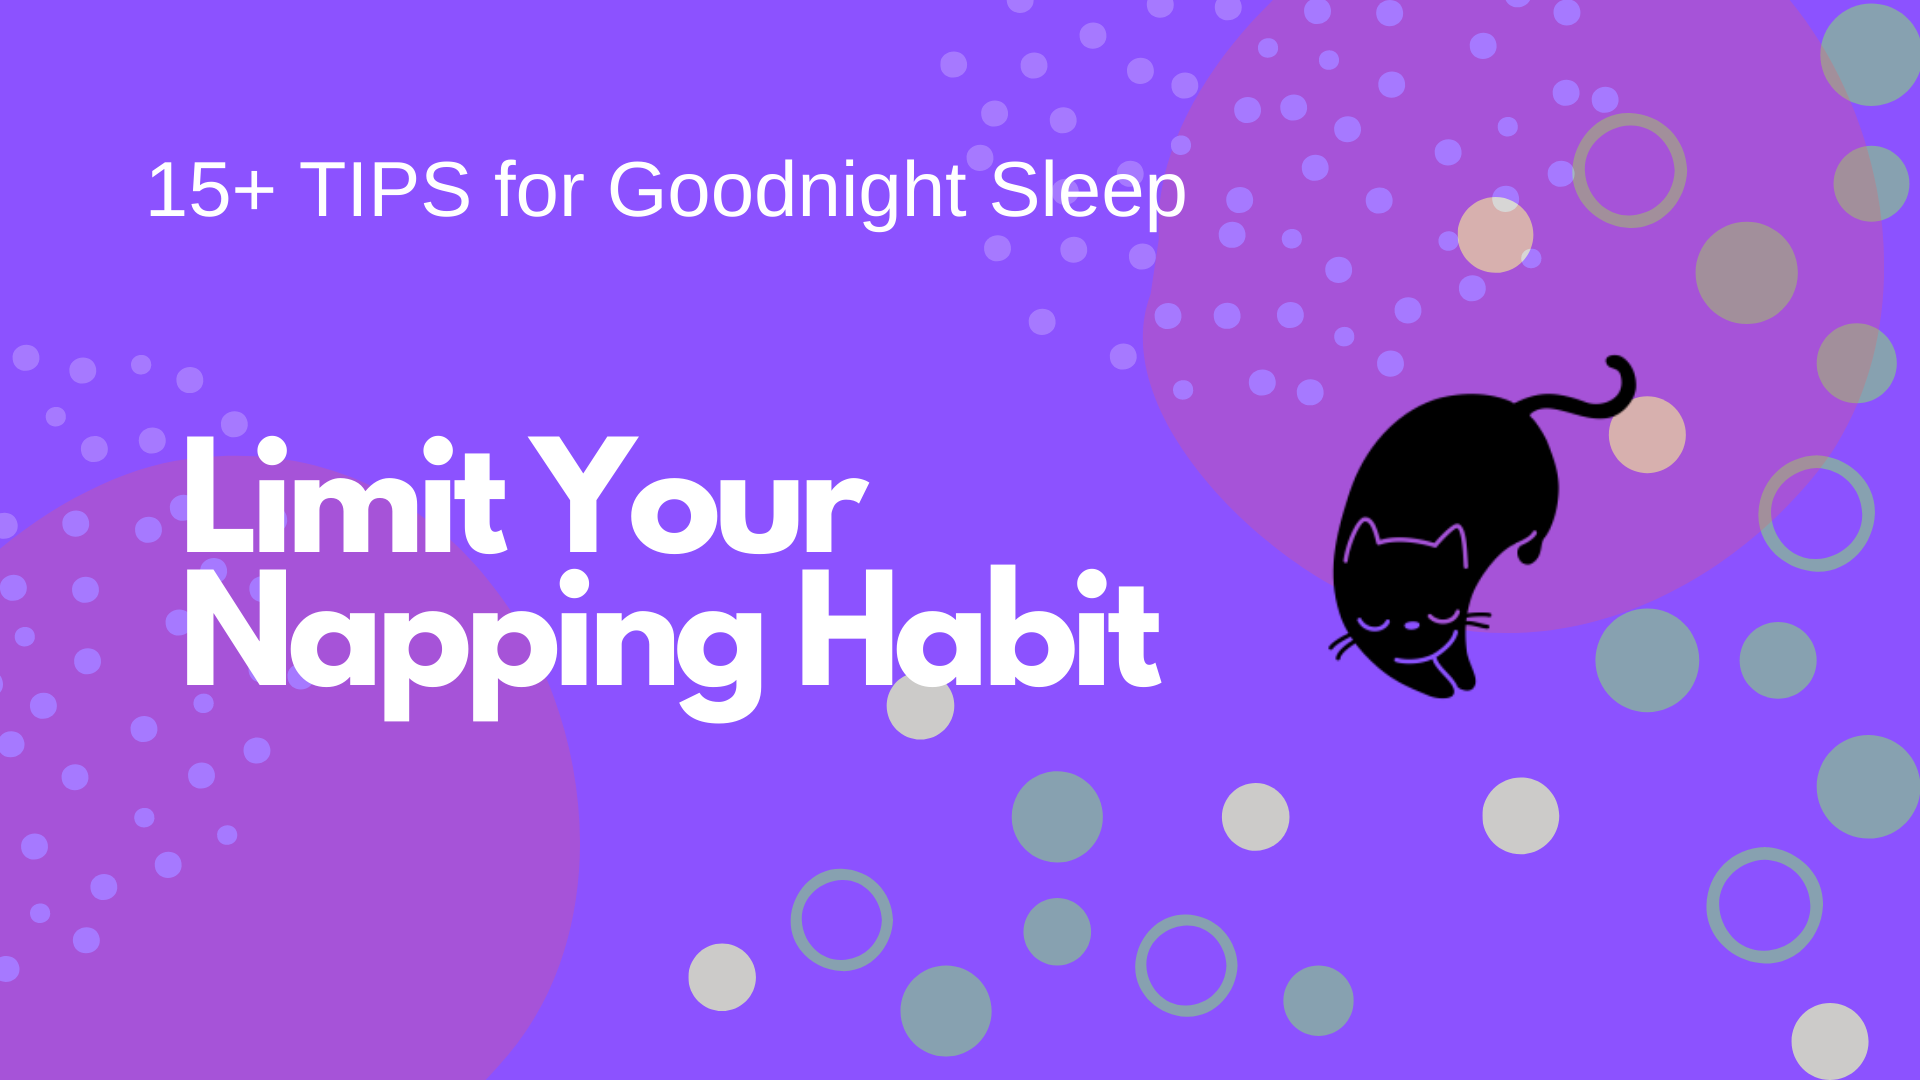 Limit Your Napping Habit